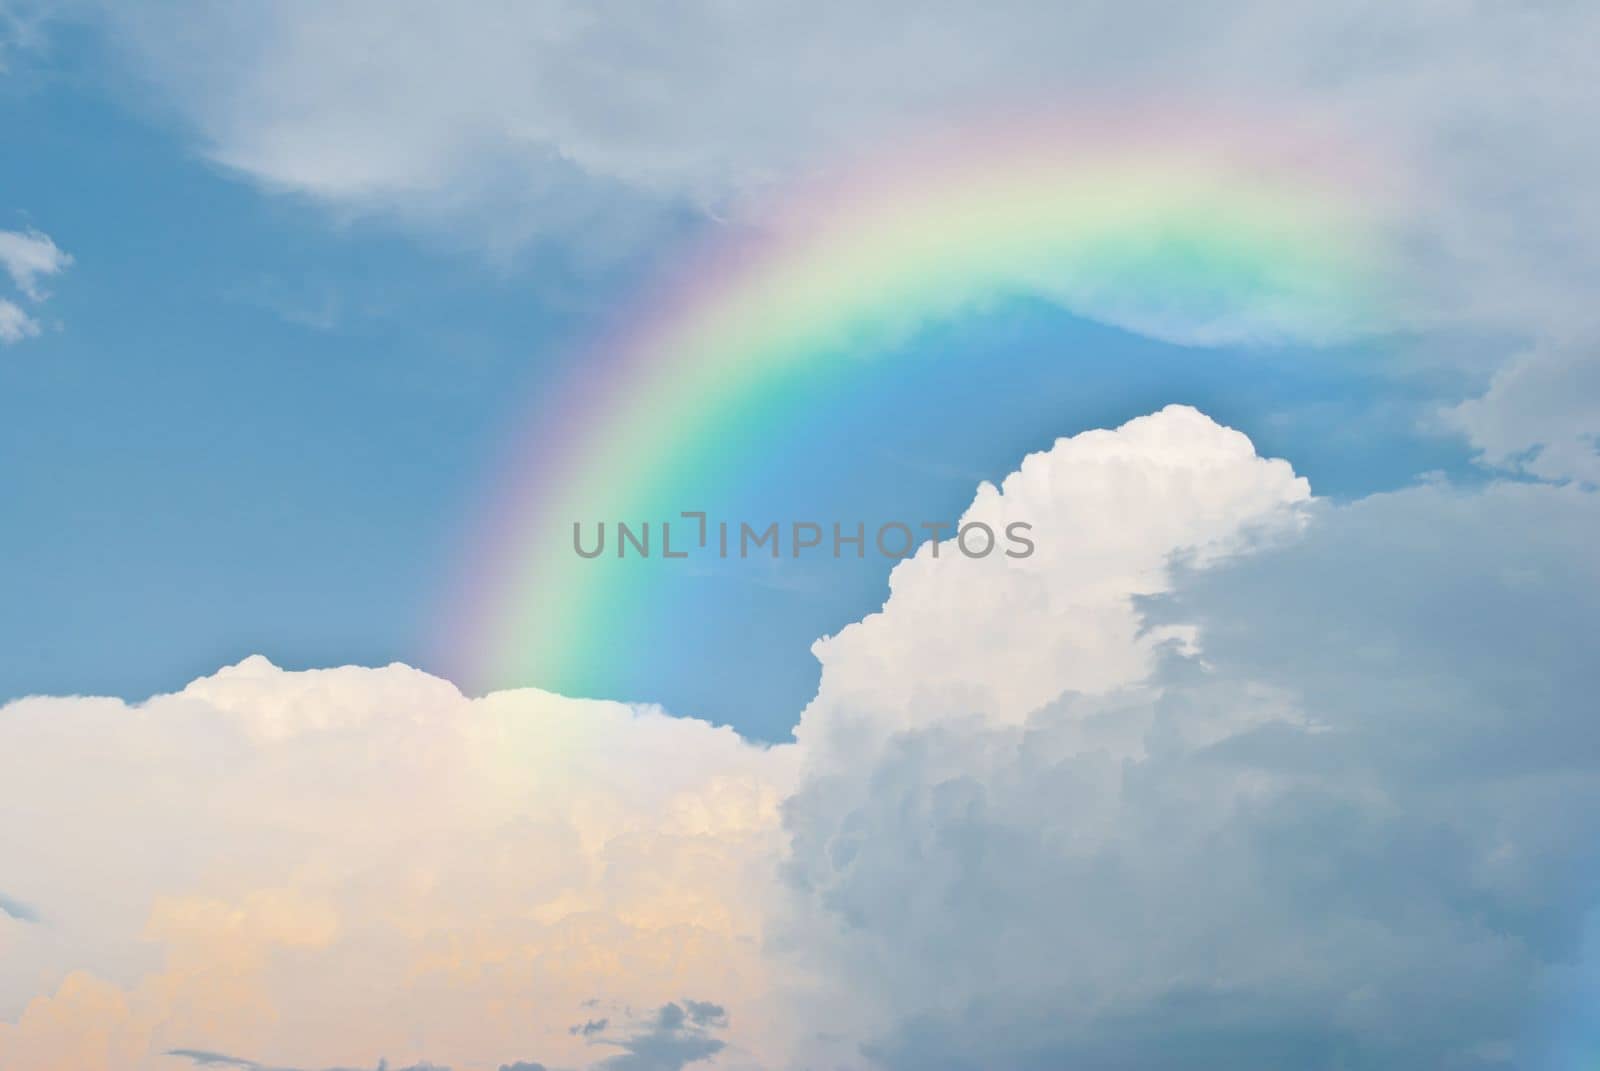 image of rainbow in blue sky and white clouds by rakoptonLPN